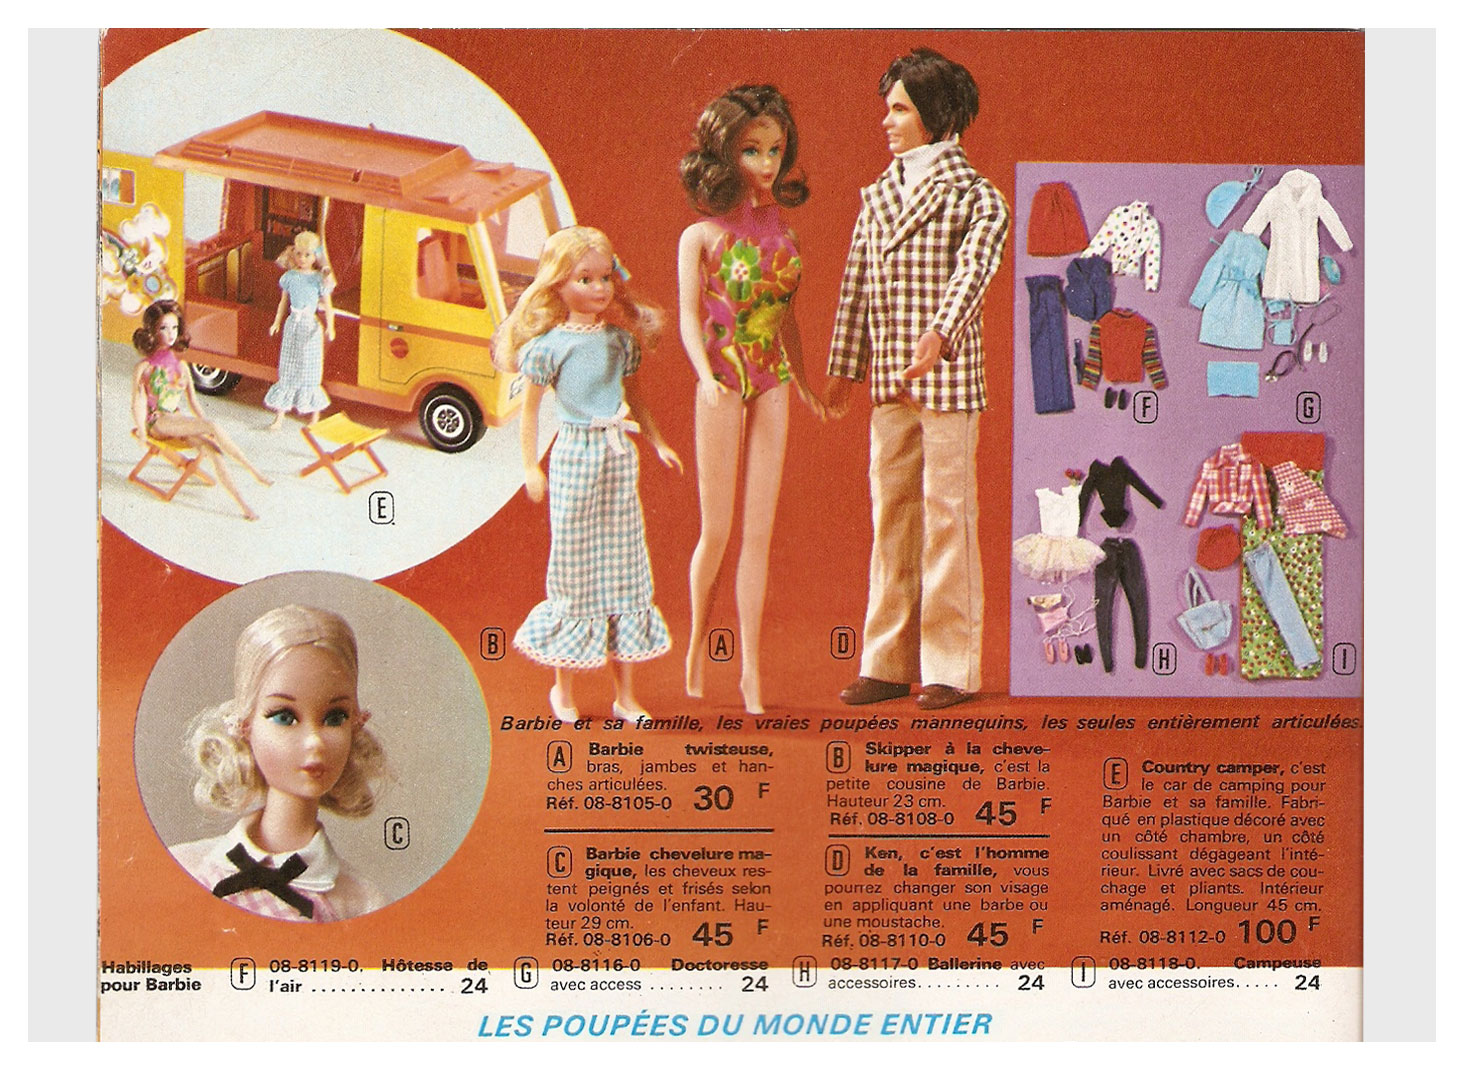 From 1973 French Noël Manufrance catalogue